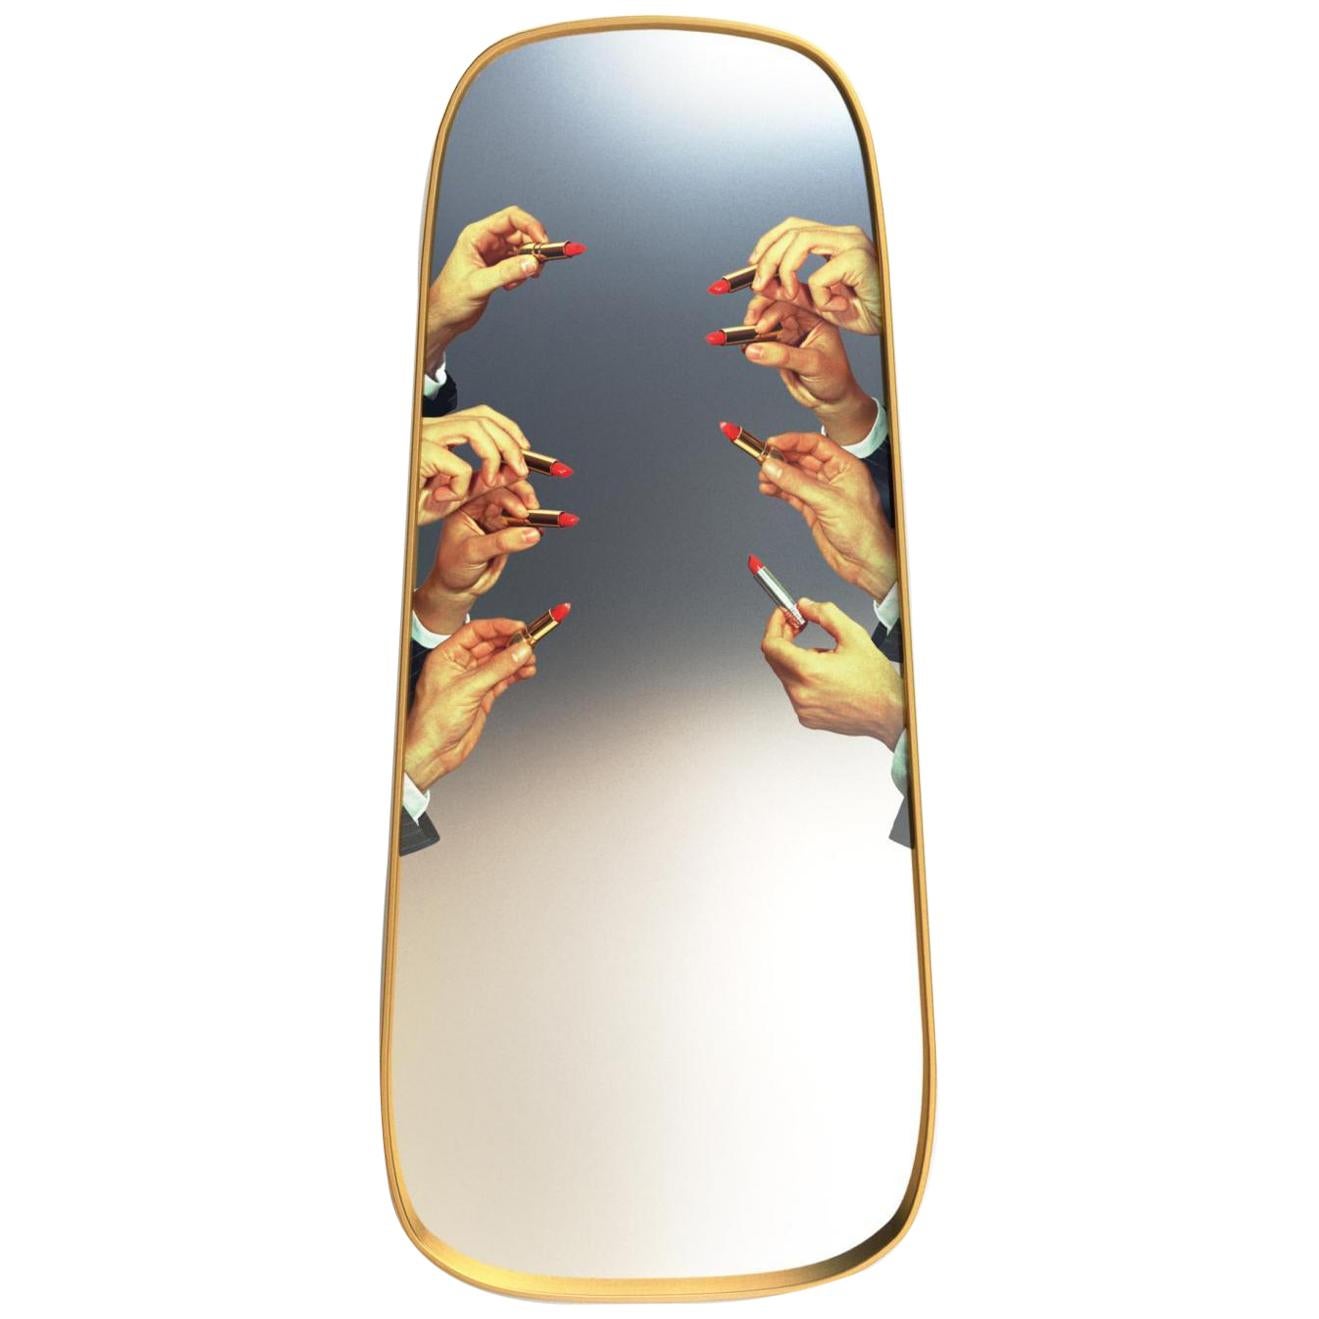 Seletti "Lipstick" Large Wall Mirror with Gold Frame by Toiletpaper